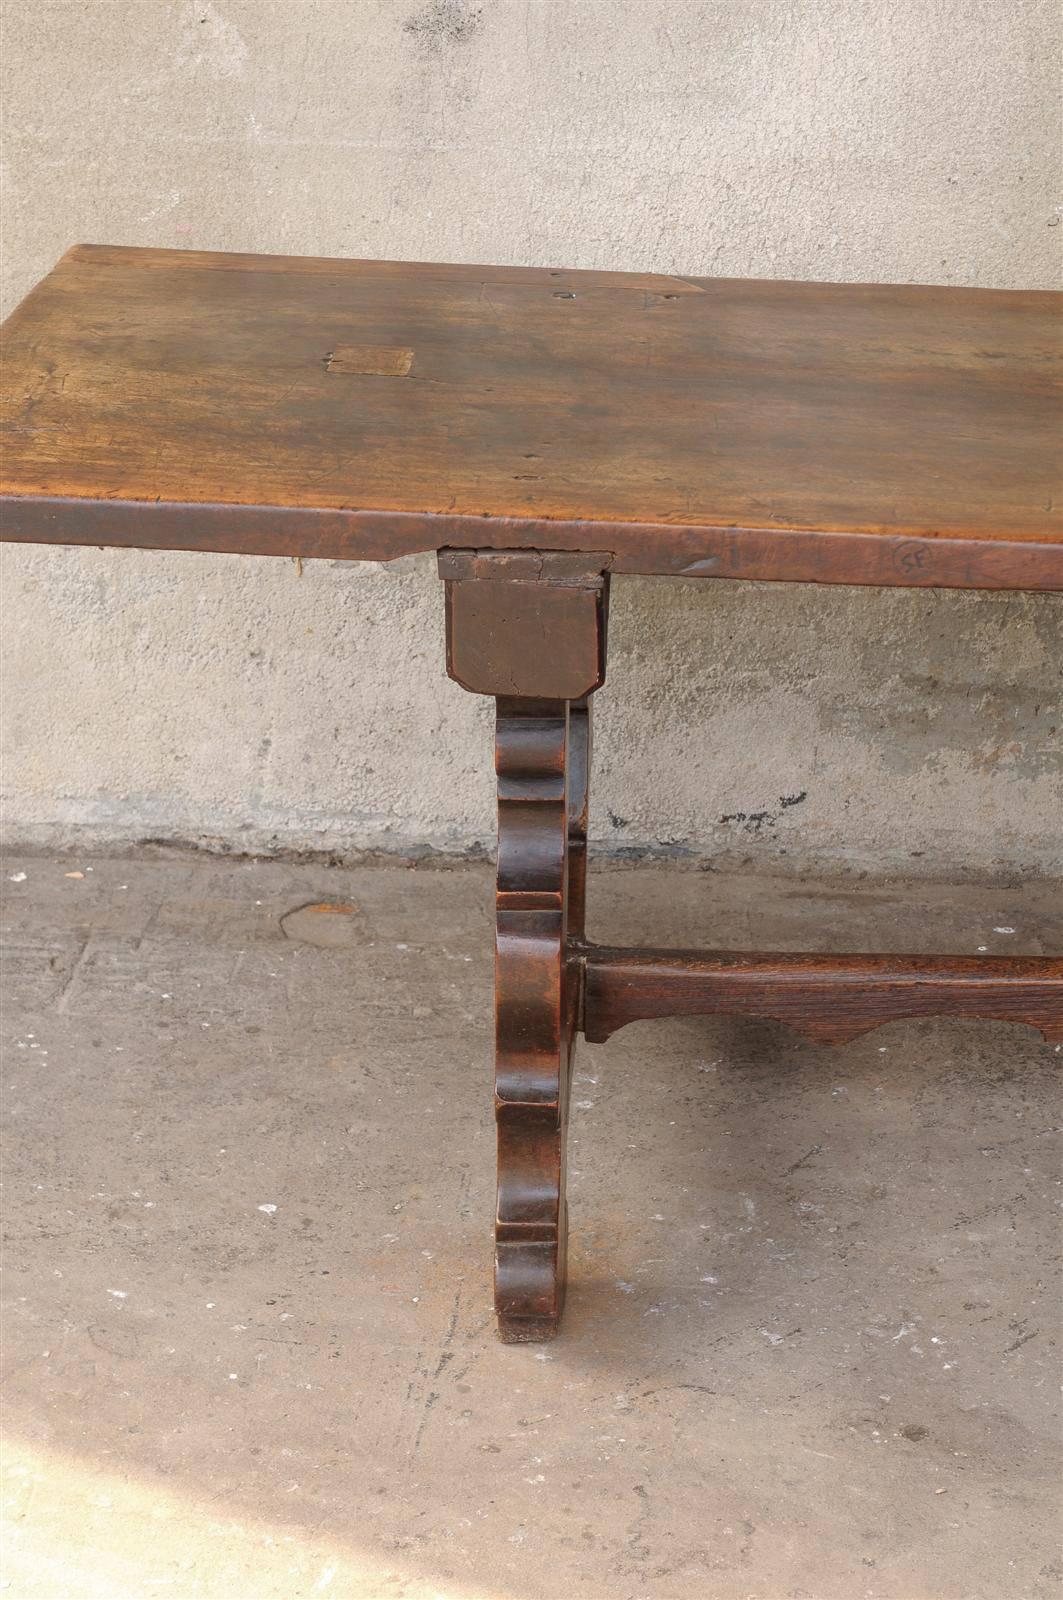 An 18th Century Italian Walnut Dining Table with Carved Trestle Legs & Cross Bar In Good Condition For Sale In Atlanta, GA